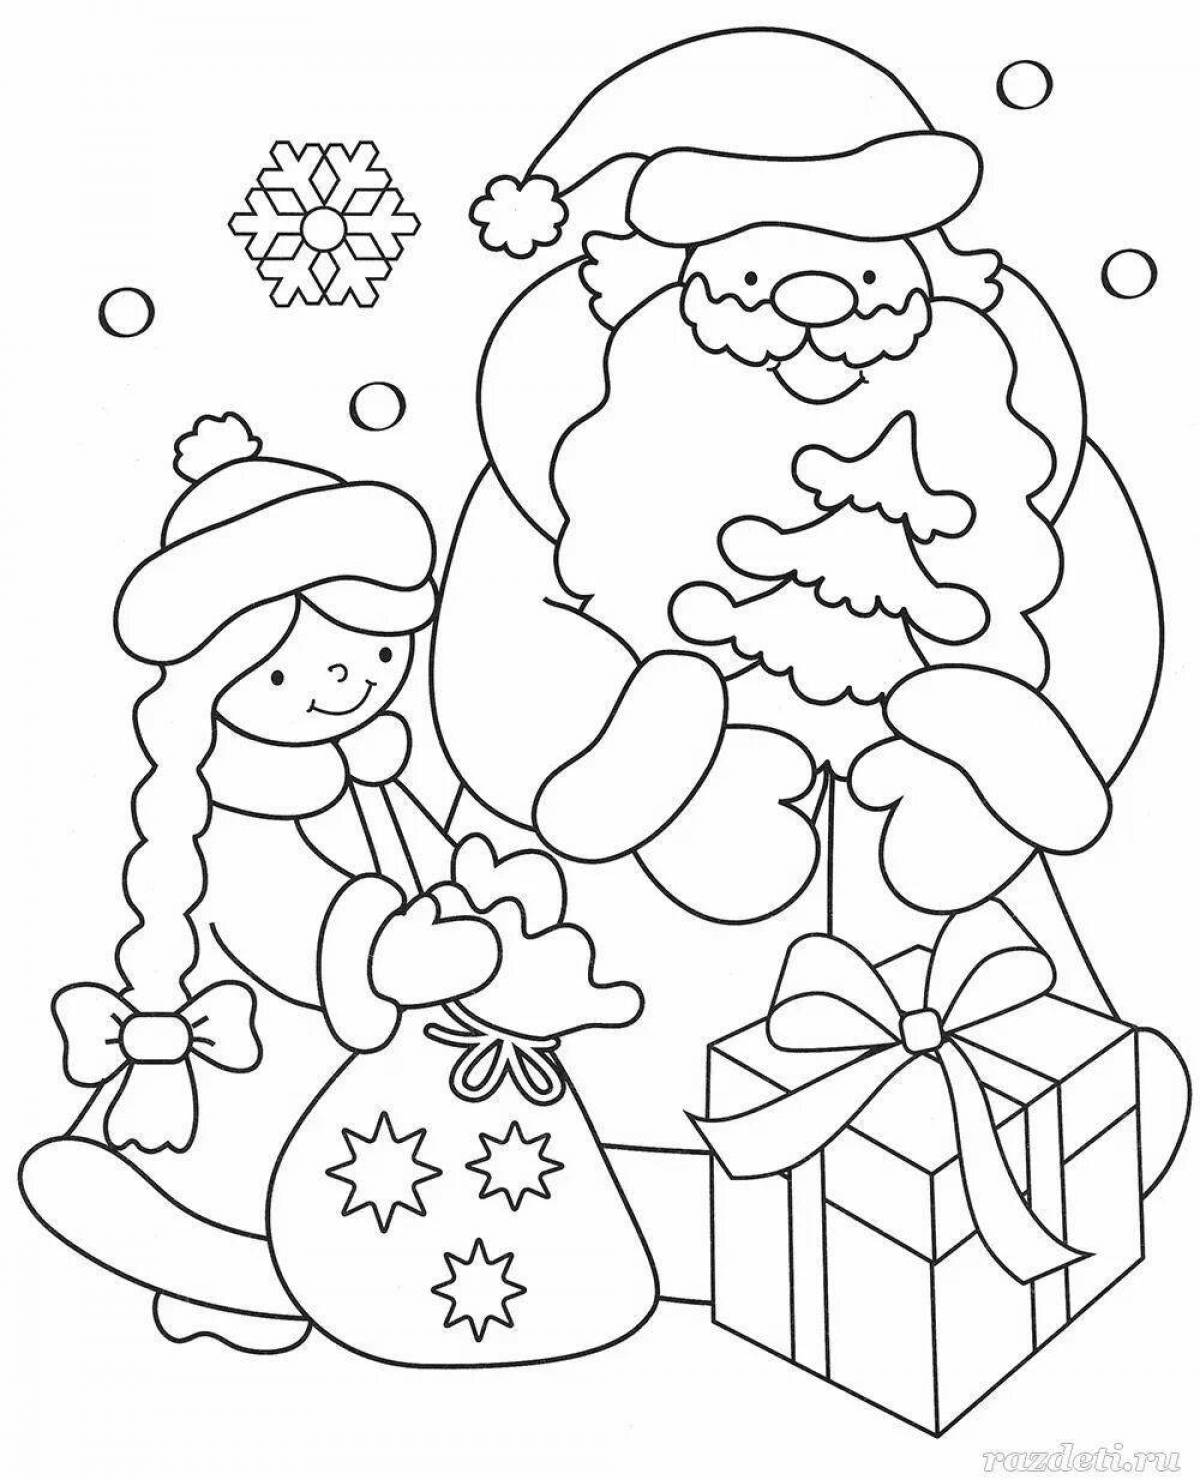 Christmas coloring playtime for children 3-4 years old